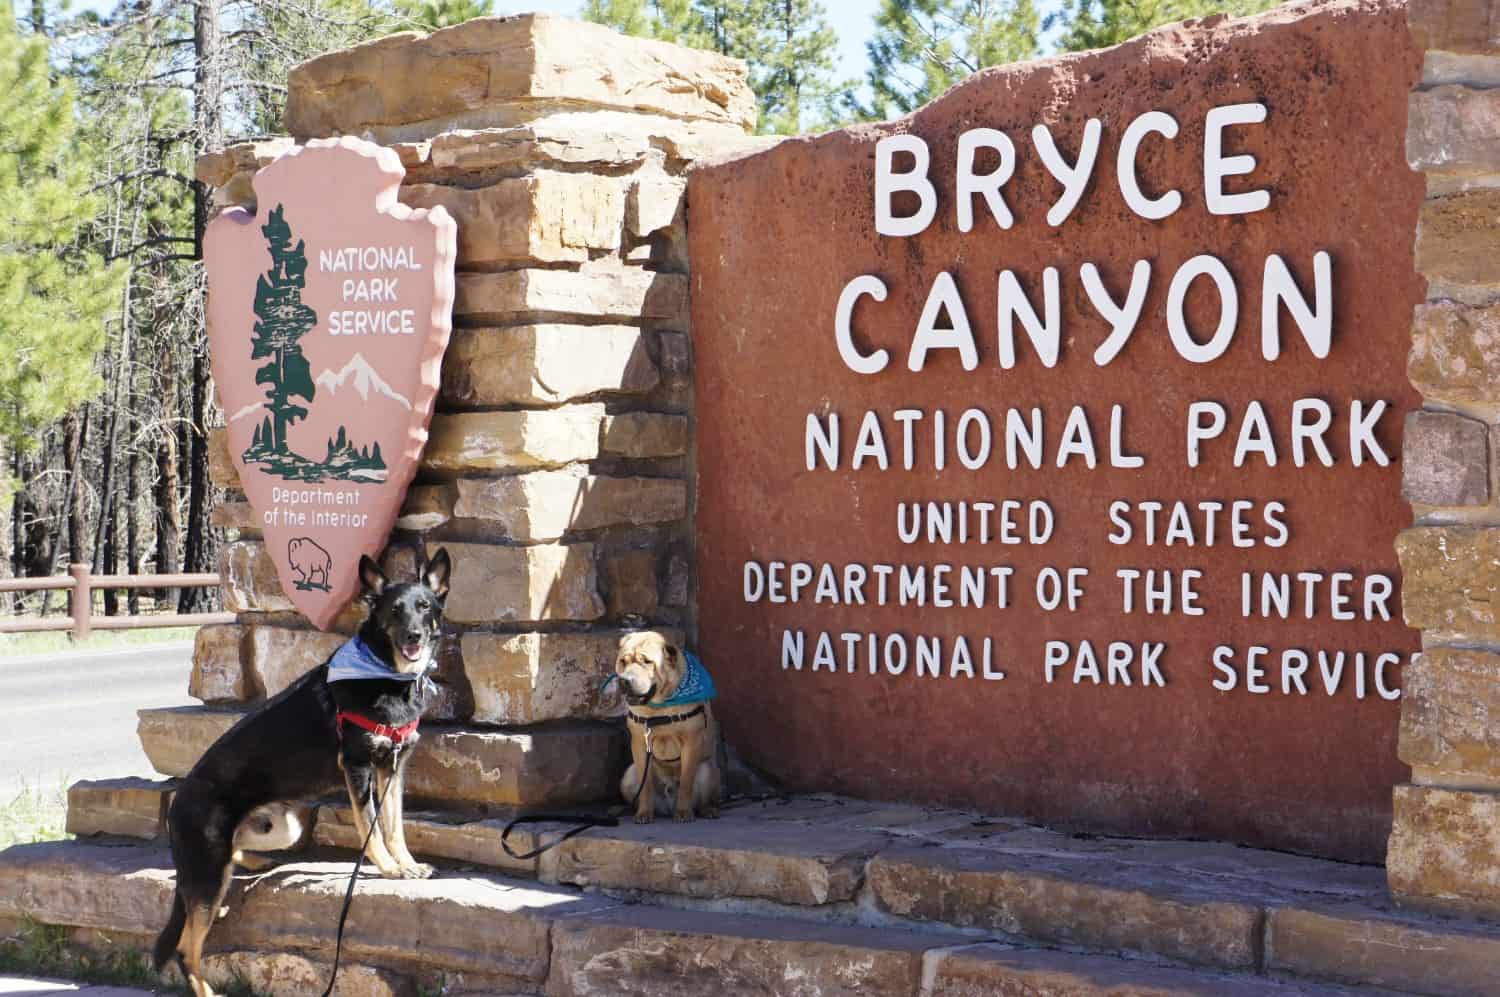 Two dogs posing with the sign at Bryce Canyon National Park in UT